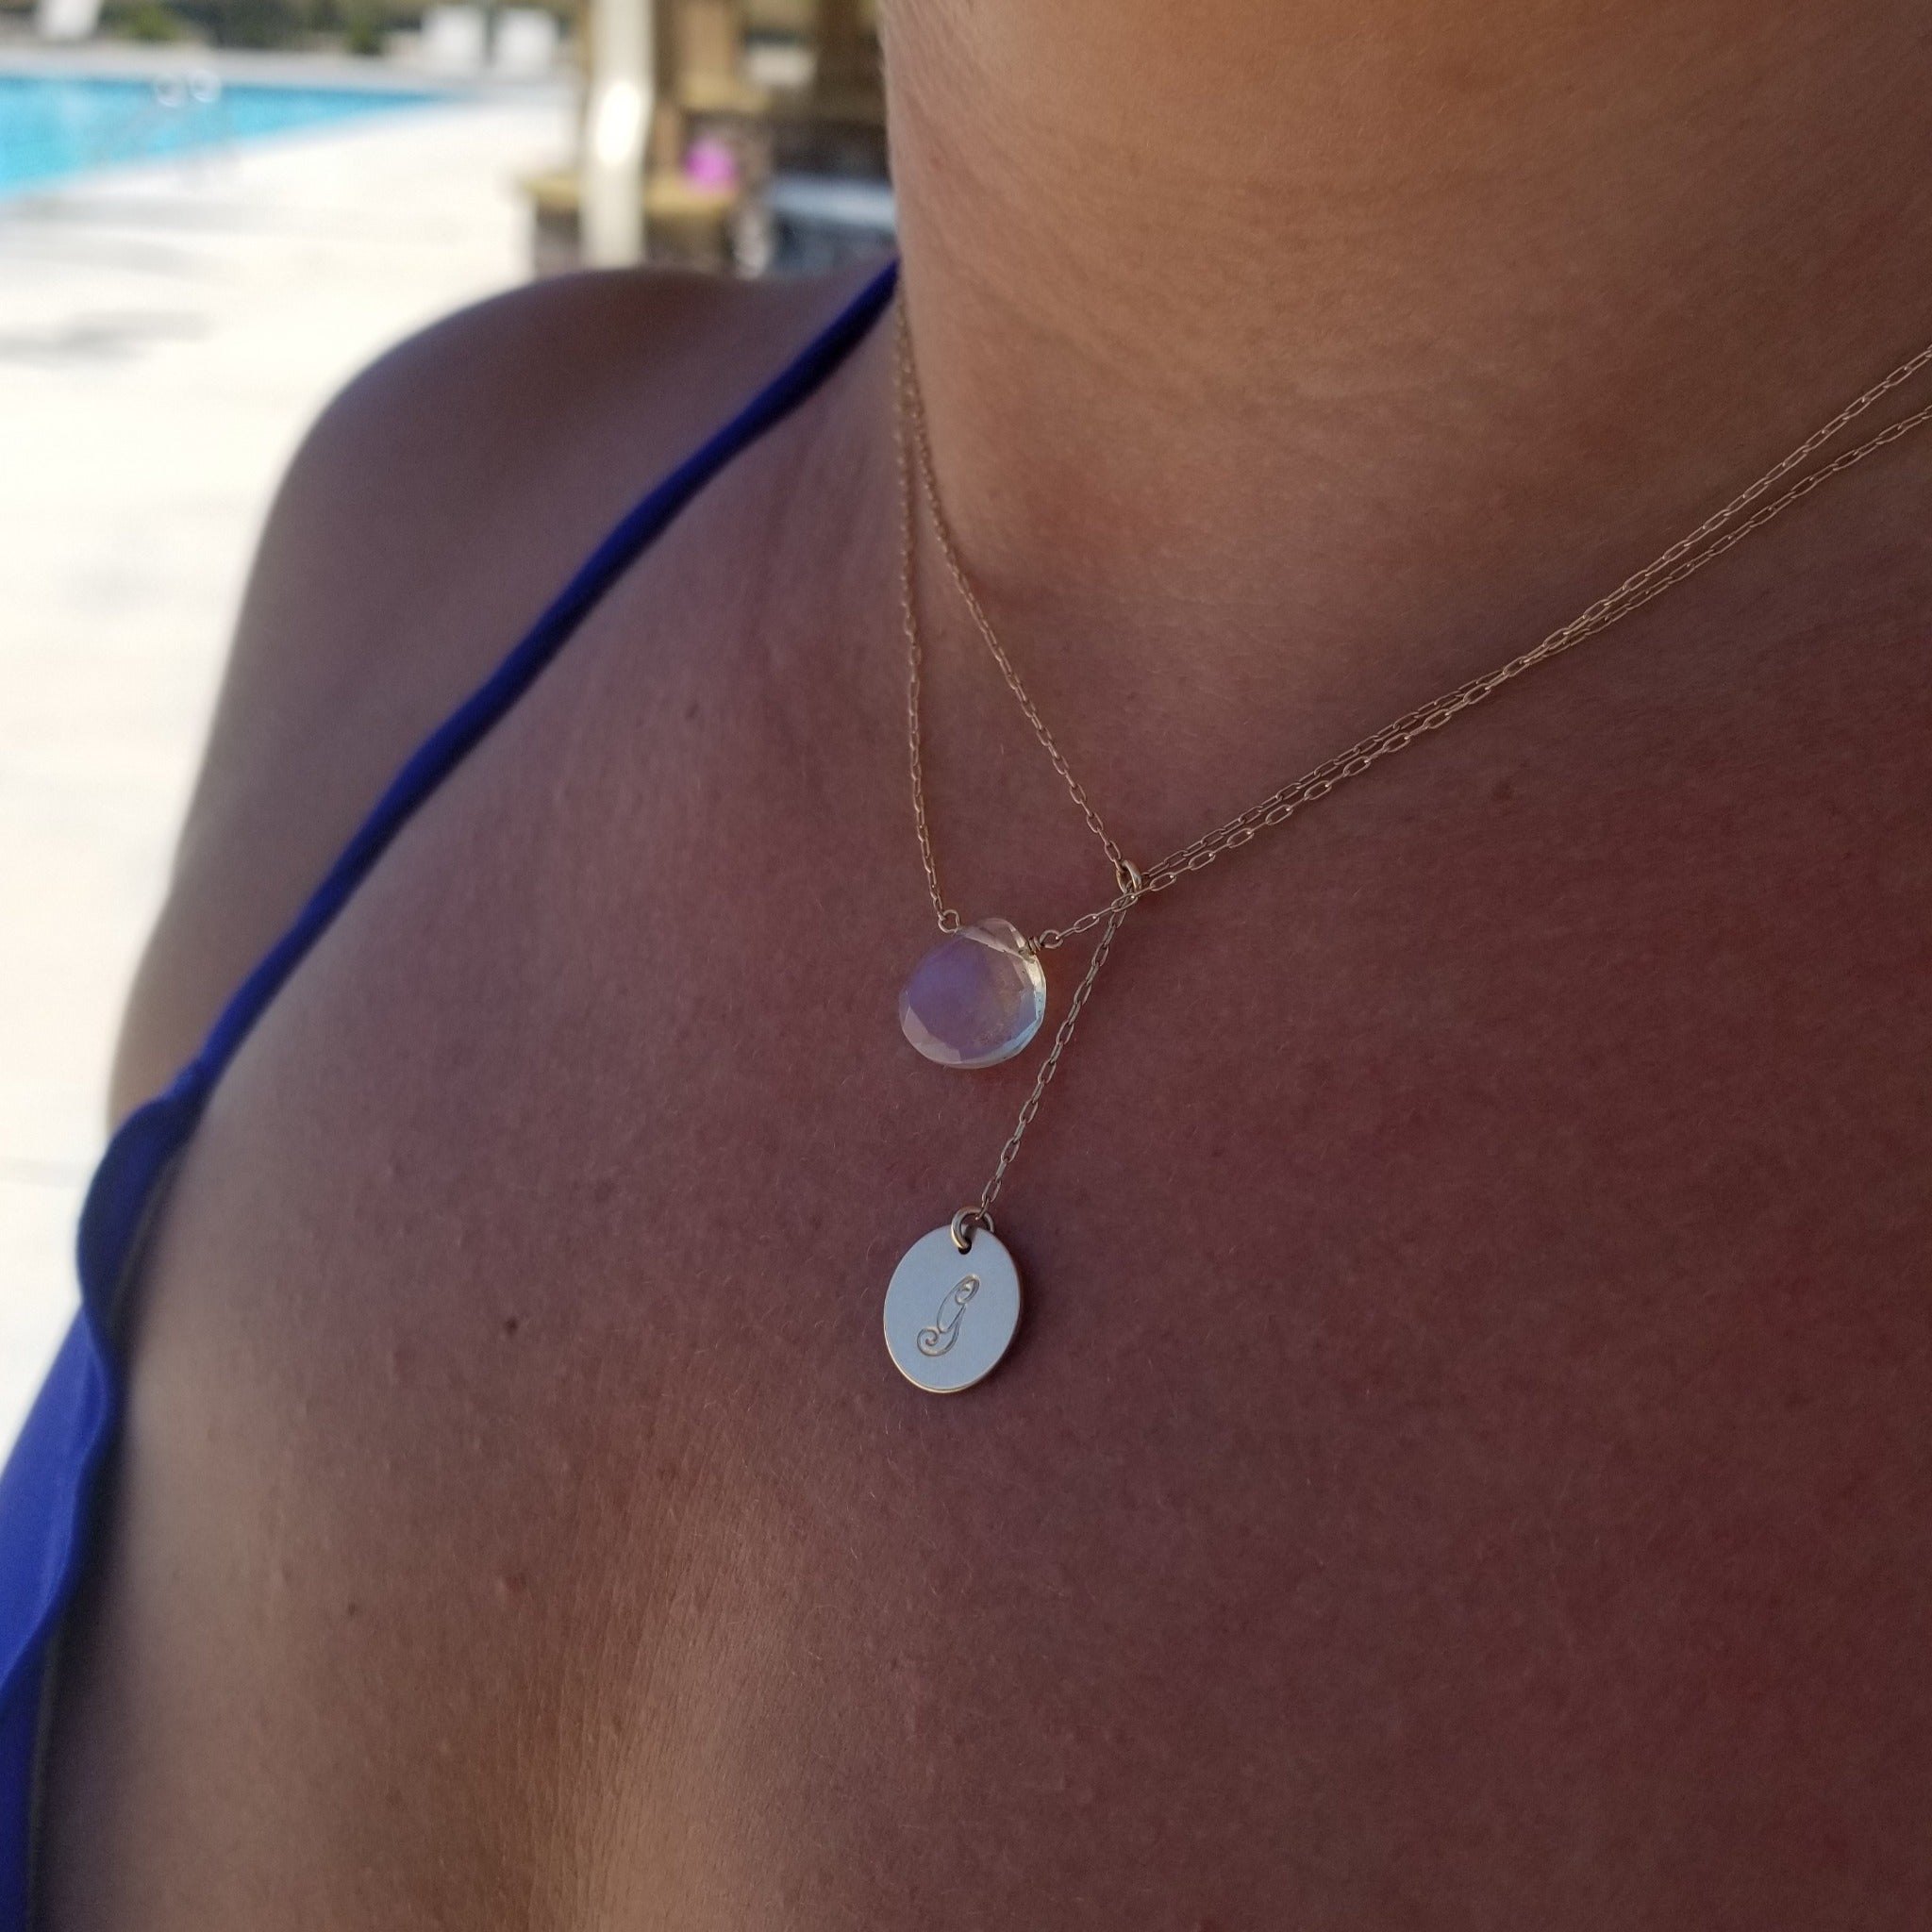 The "Shannon" - Natural Chalcedony Crystal Necklace - Sterling or Gold